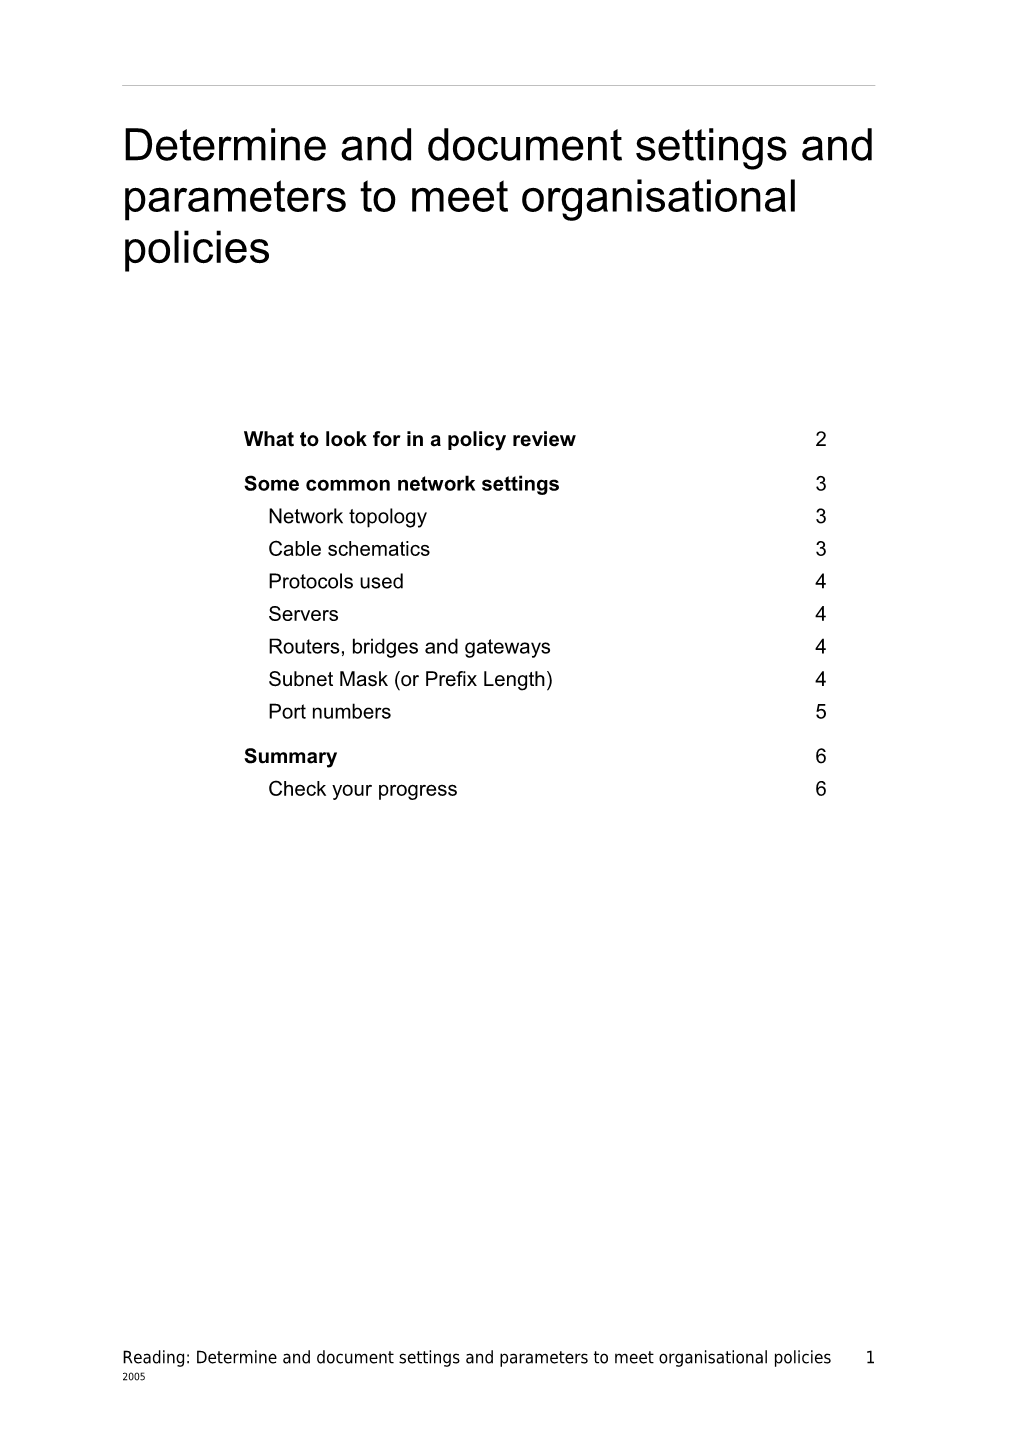 Determine and Document Settings and Parameters to Meet Organisational Policies